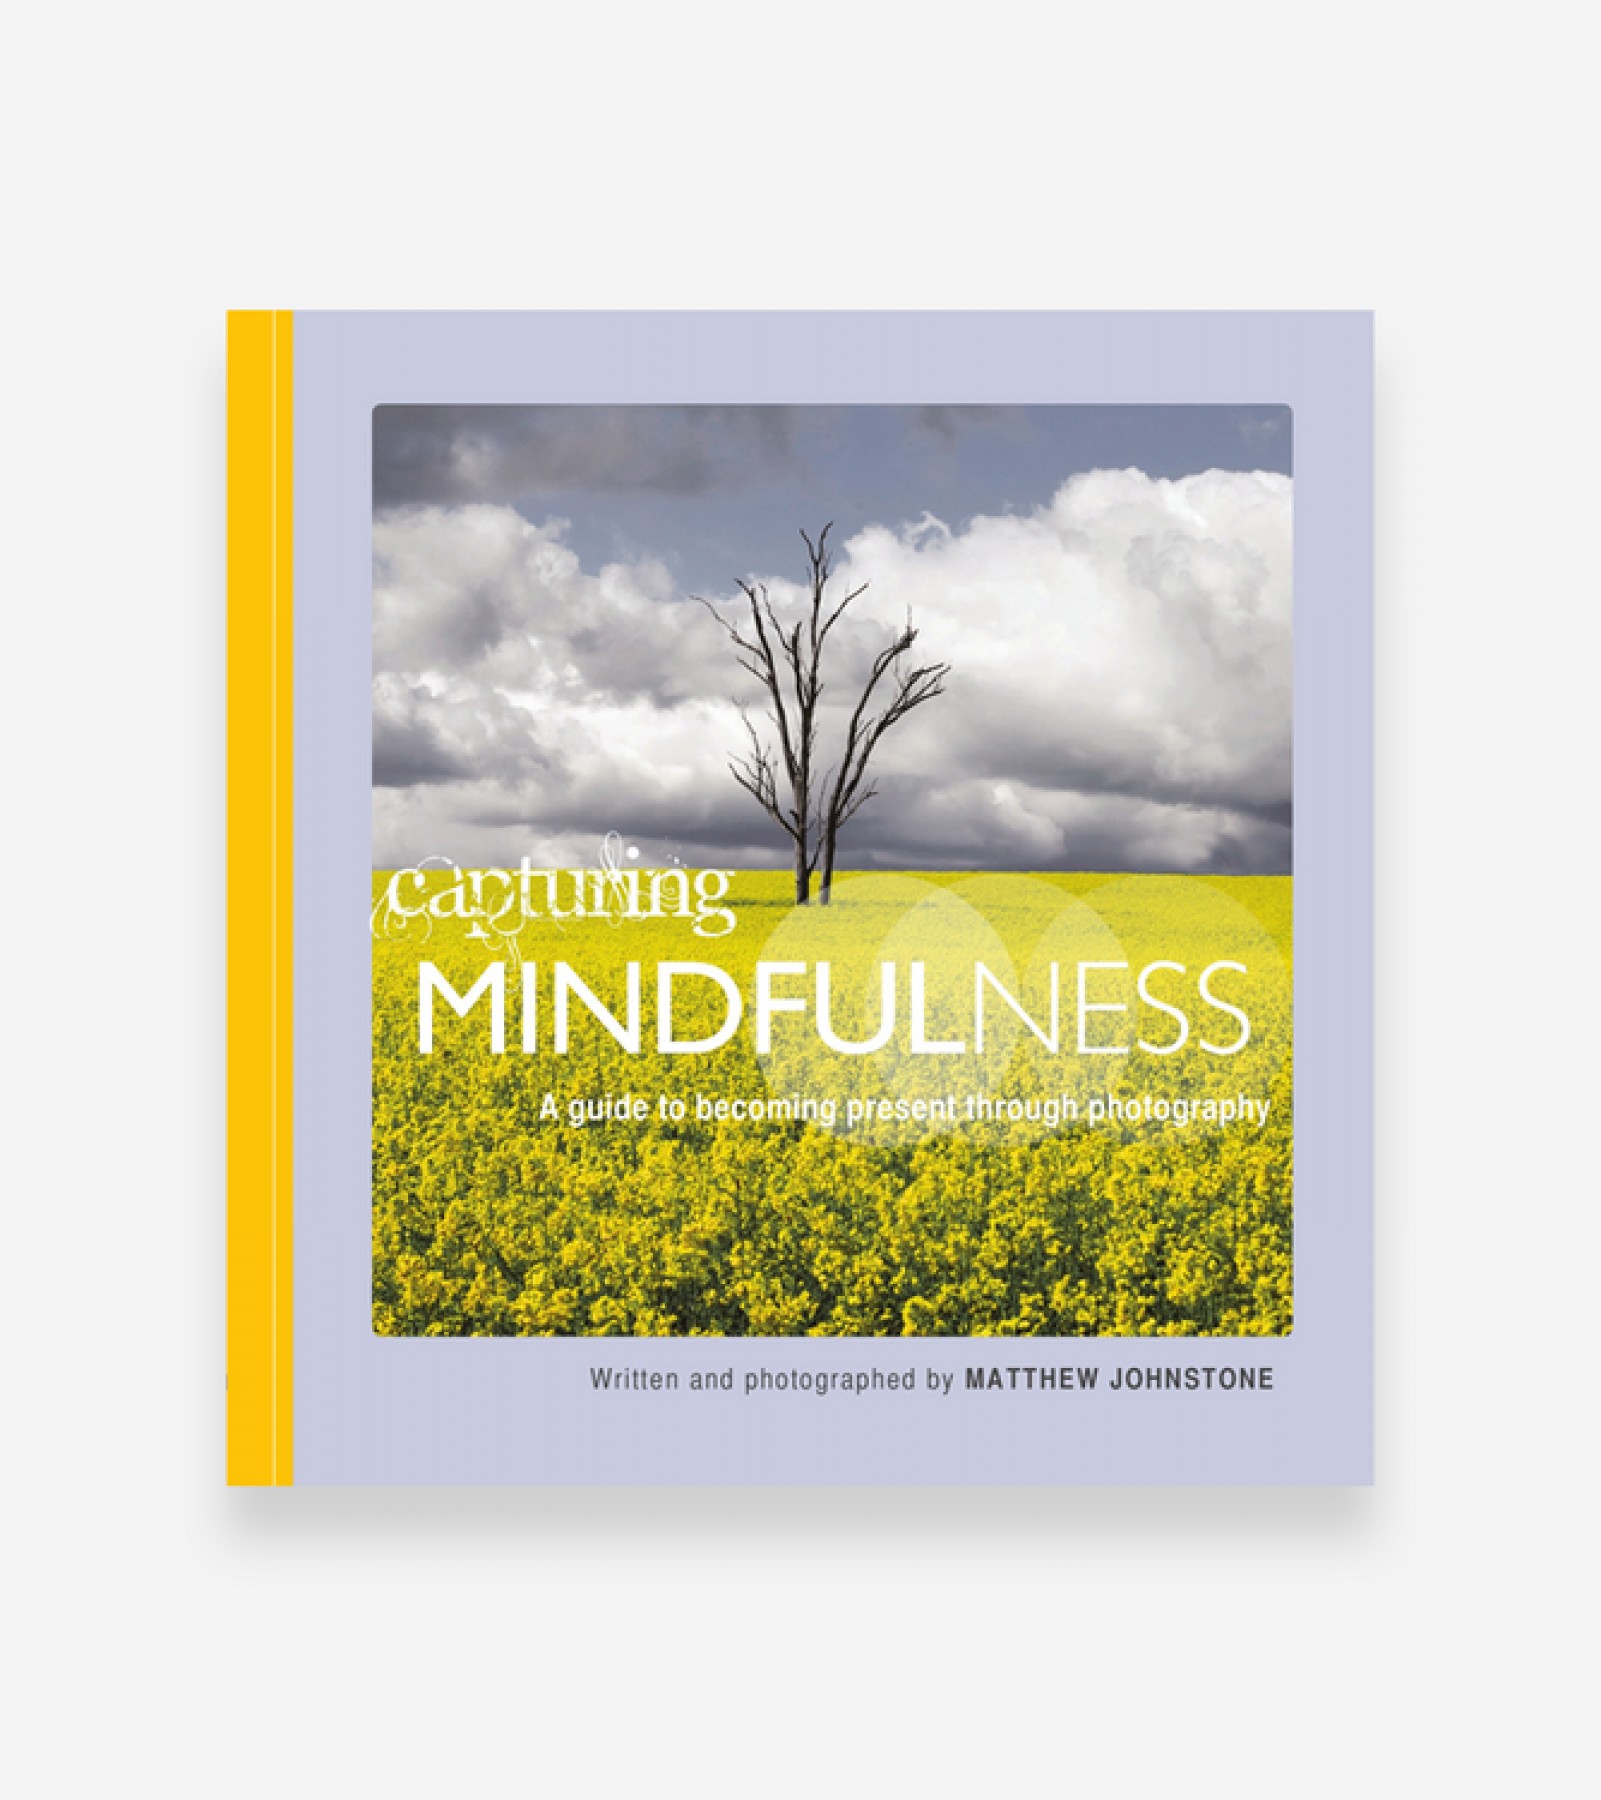 Capturing Mindfulness: A guide to becoming present through photography